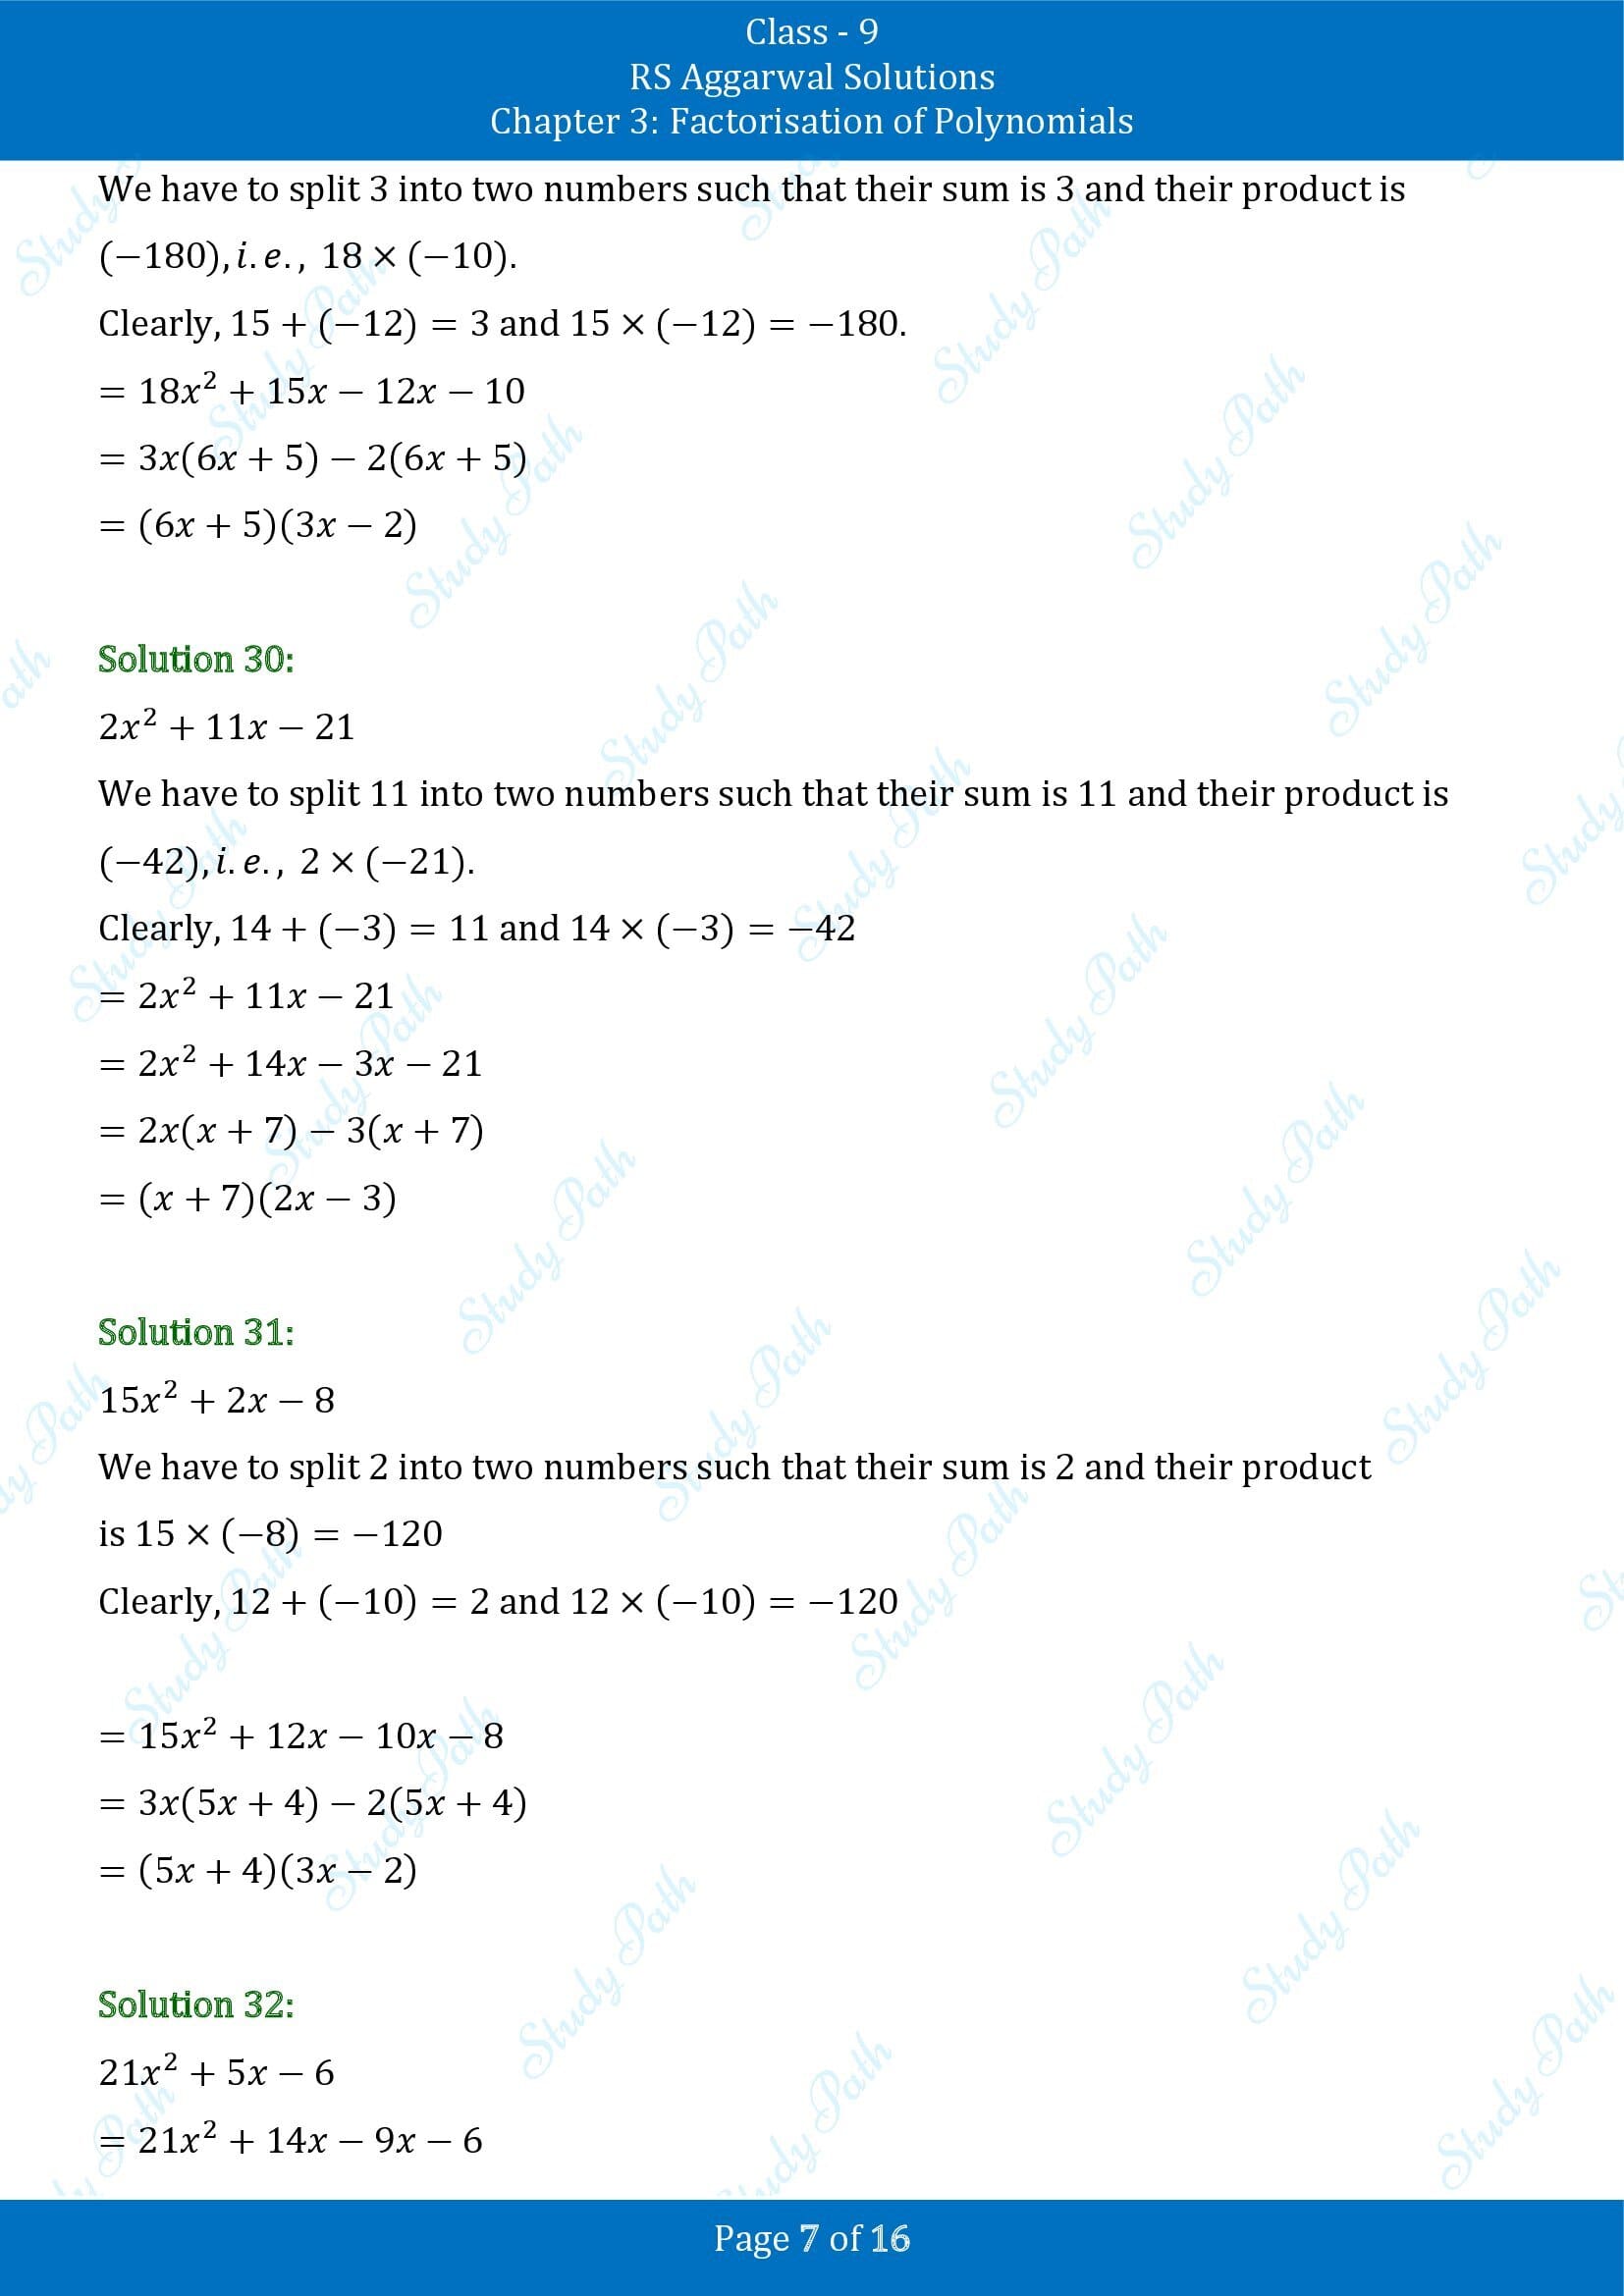 RS Aggarwal Solutions Class 9 Chapter 3 Factorisation of Polynomials Exercise 3C 00007